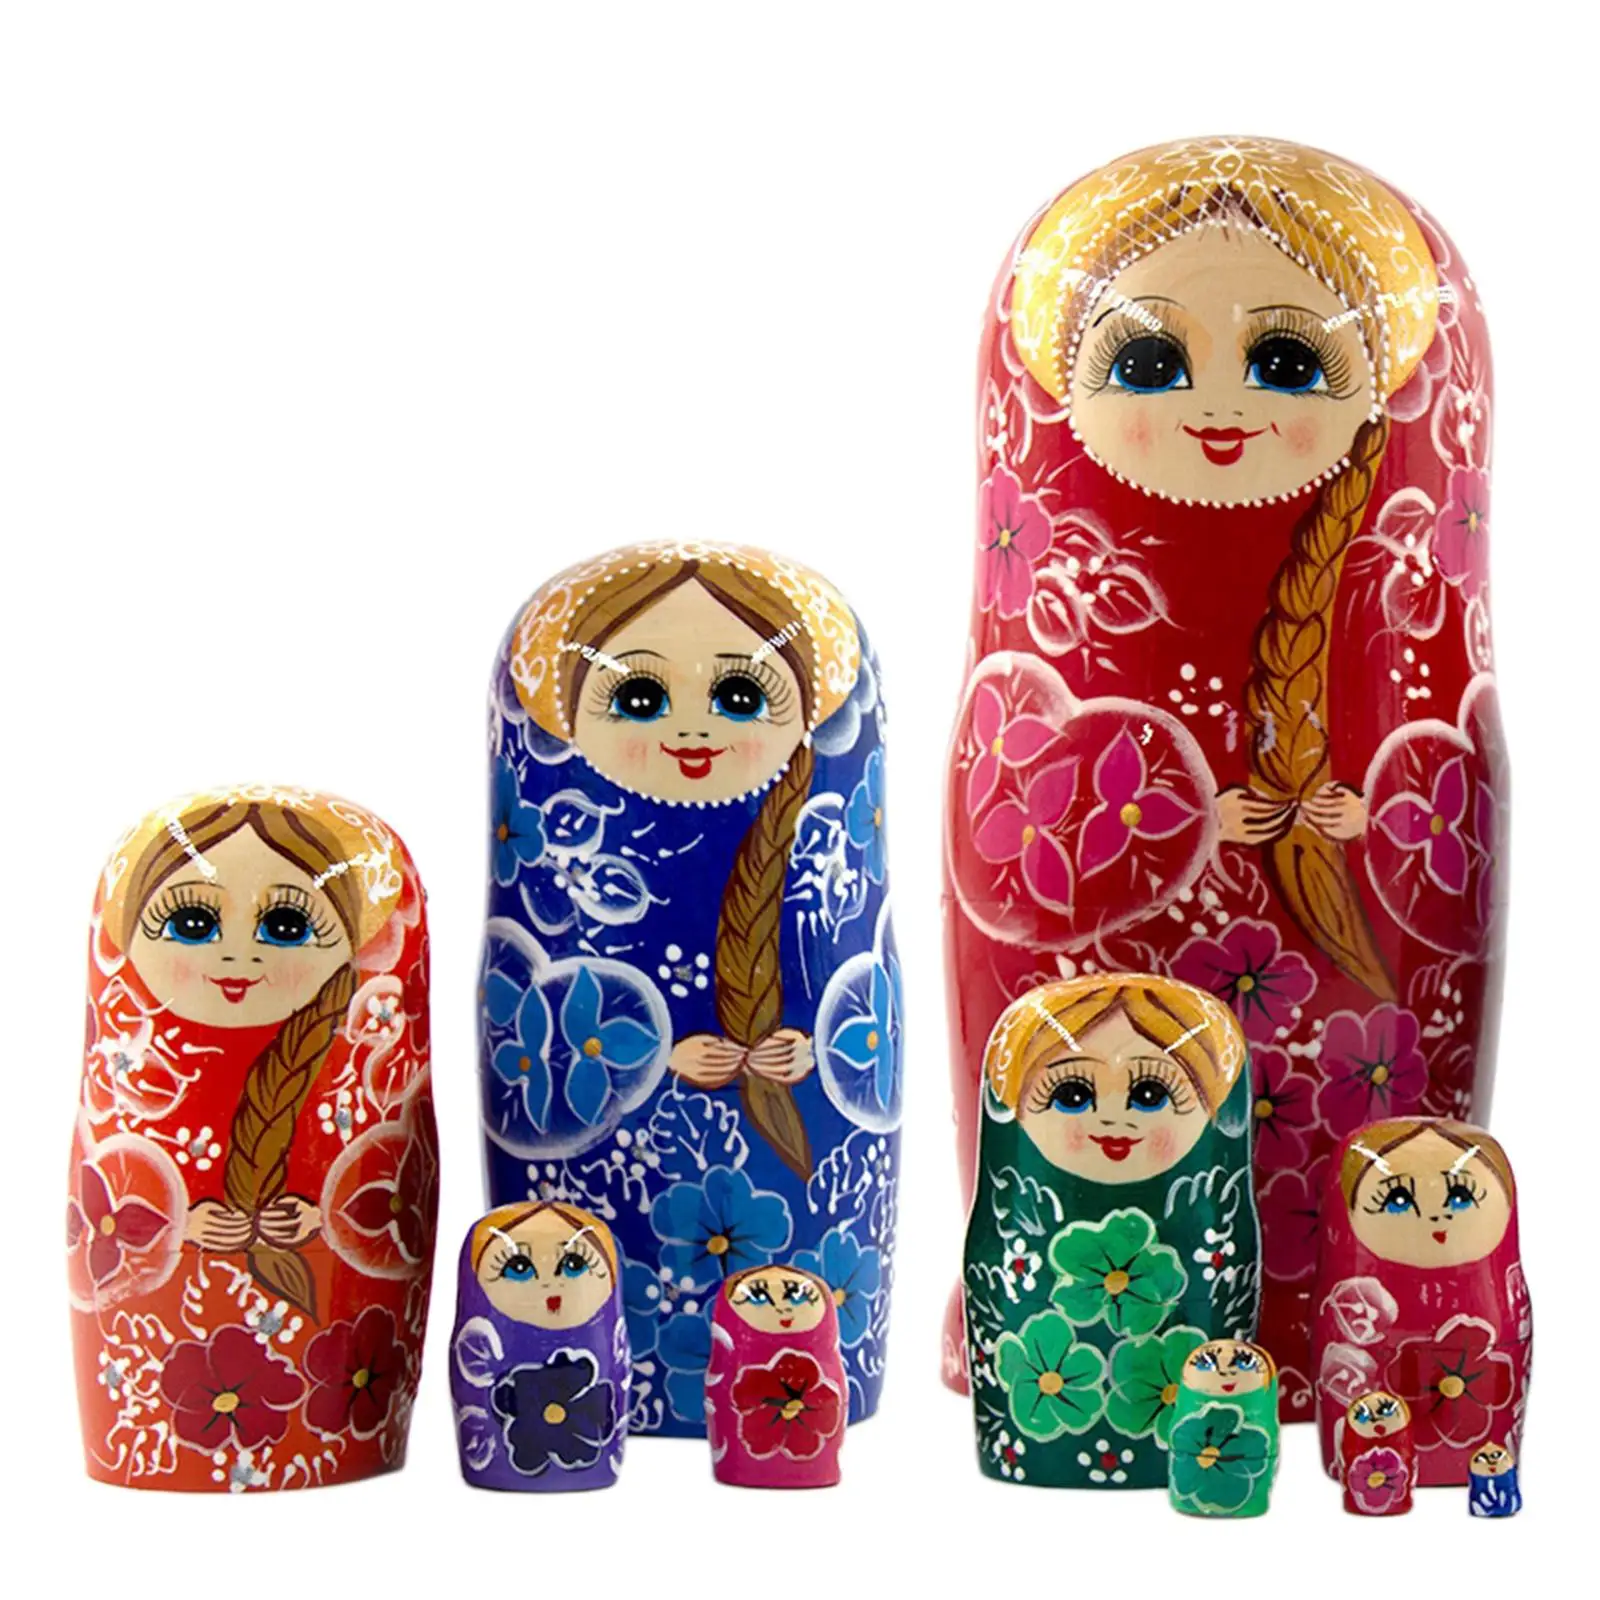 10 Pieces Nesting Dolls Toy Decoration for Themed Party Girls Boys Families